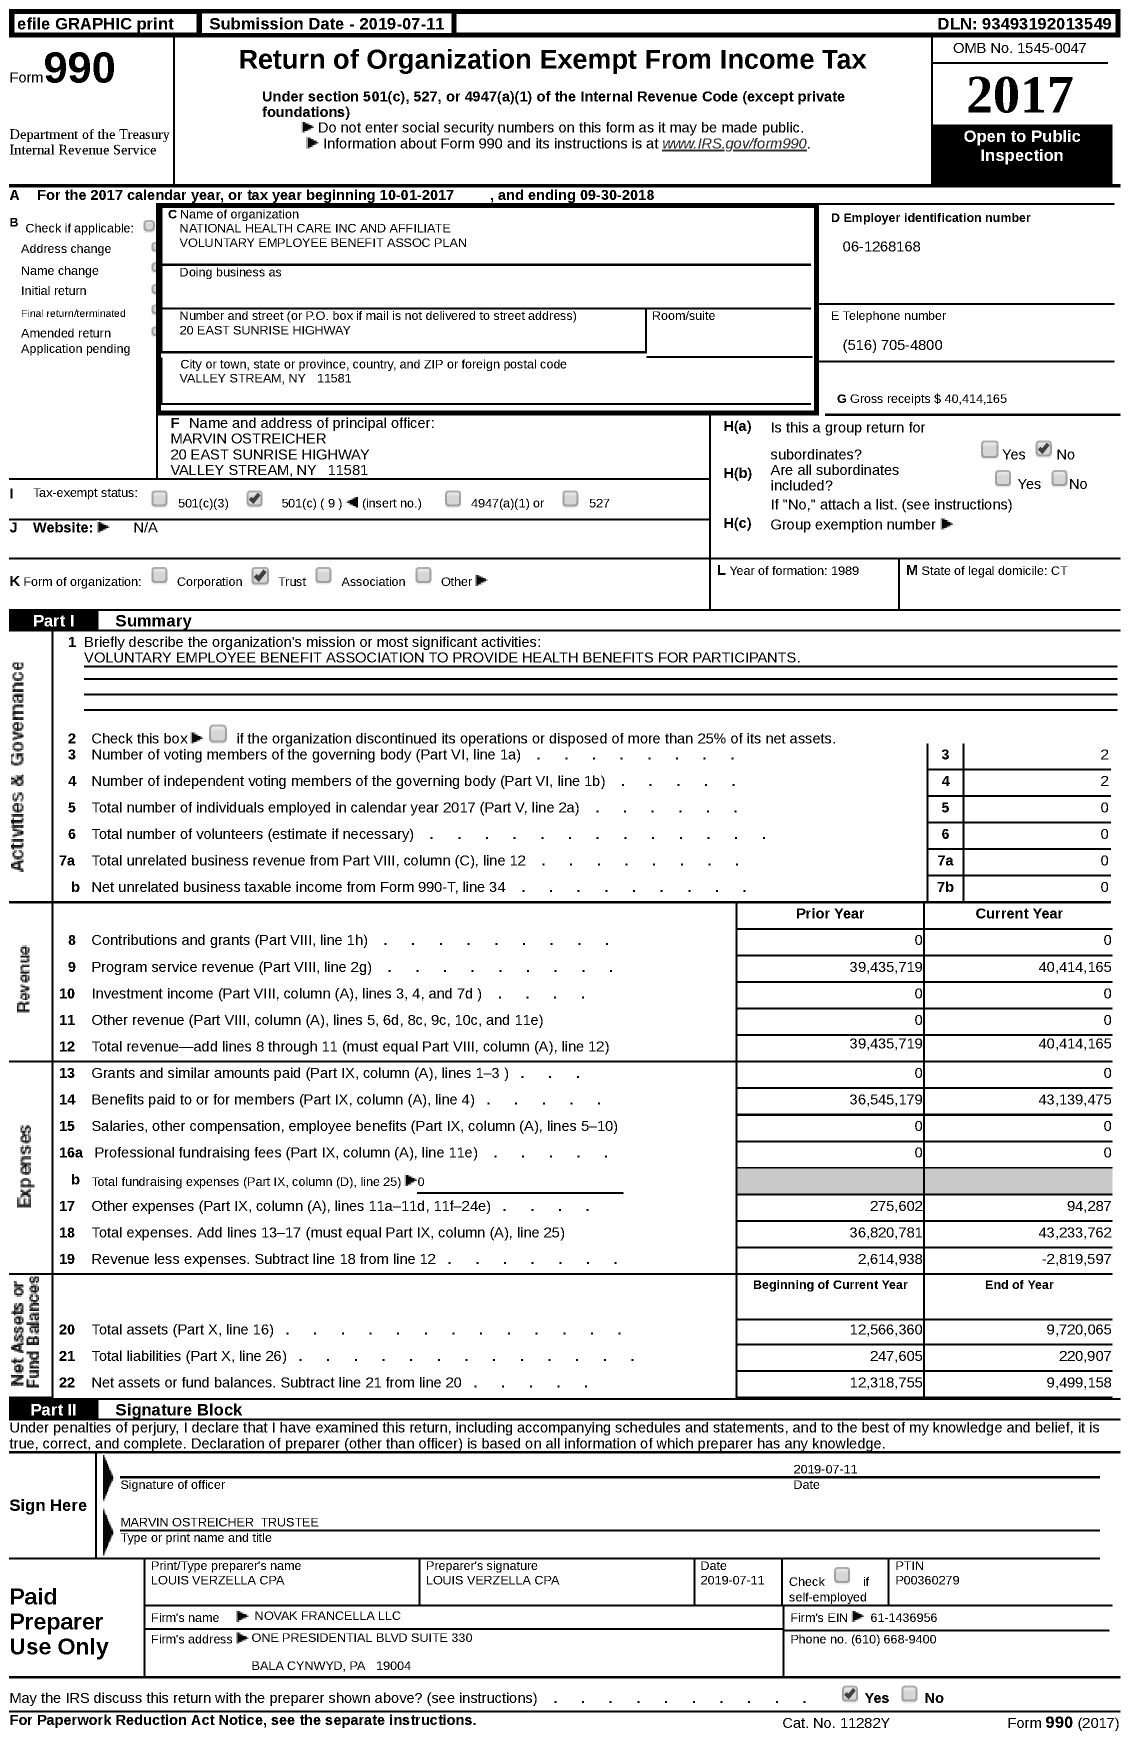 Image of first page of 2017 Form 990 for National Health Care and Affiliate Voluntary Employee Benefit Association Plan